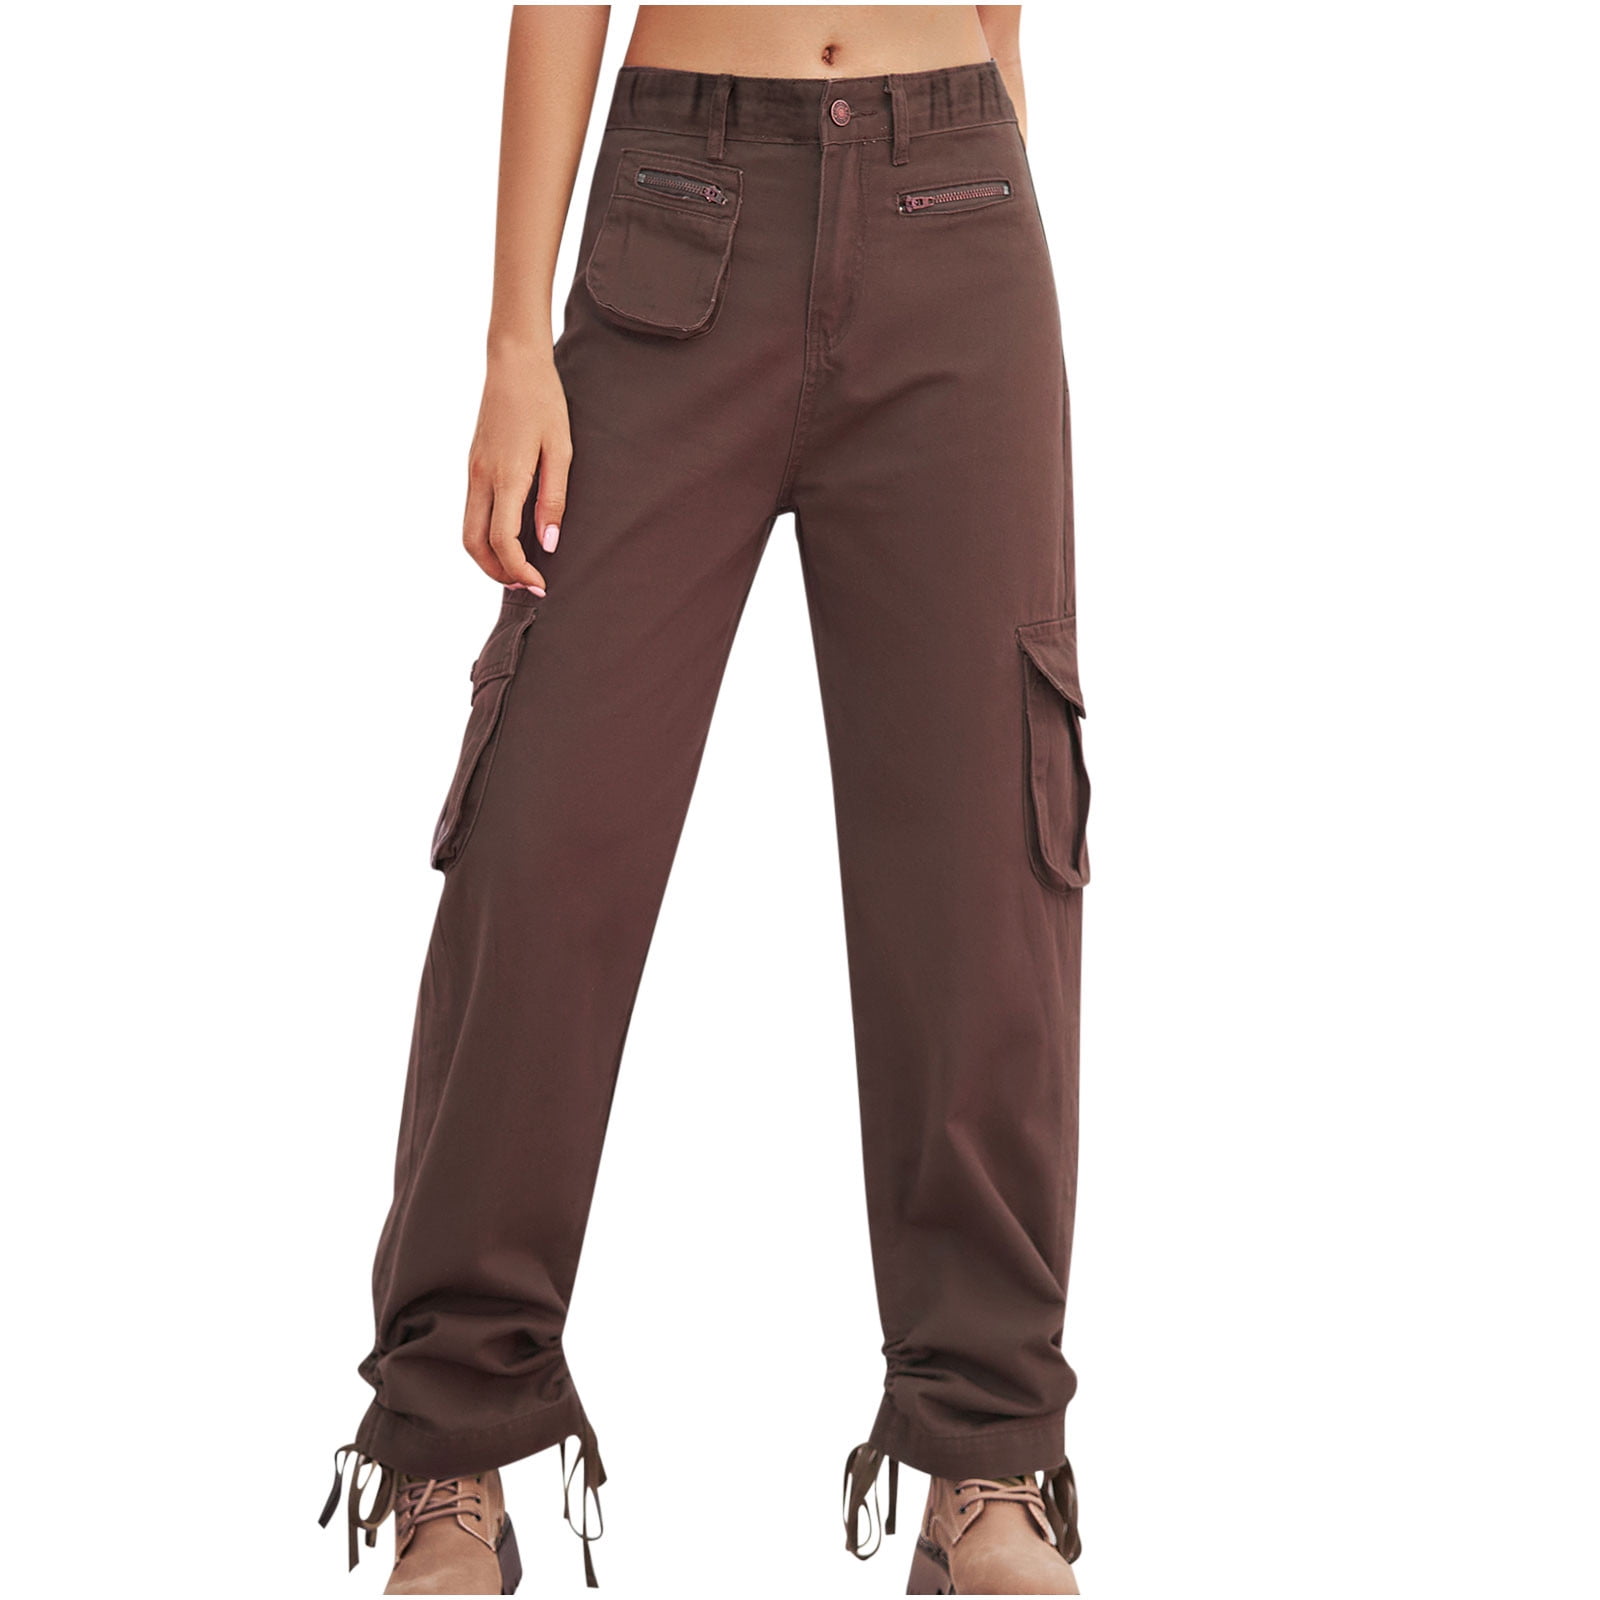 HNVAVQ Cargo Pants Women Casual Tactical Pants Streetwear Multi Pockets  Trousers Ladies Fashion Walking Trousers at  Women's Clothing store